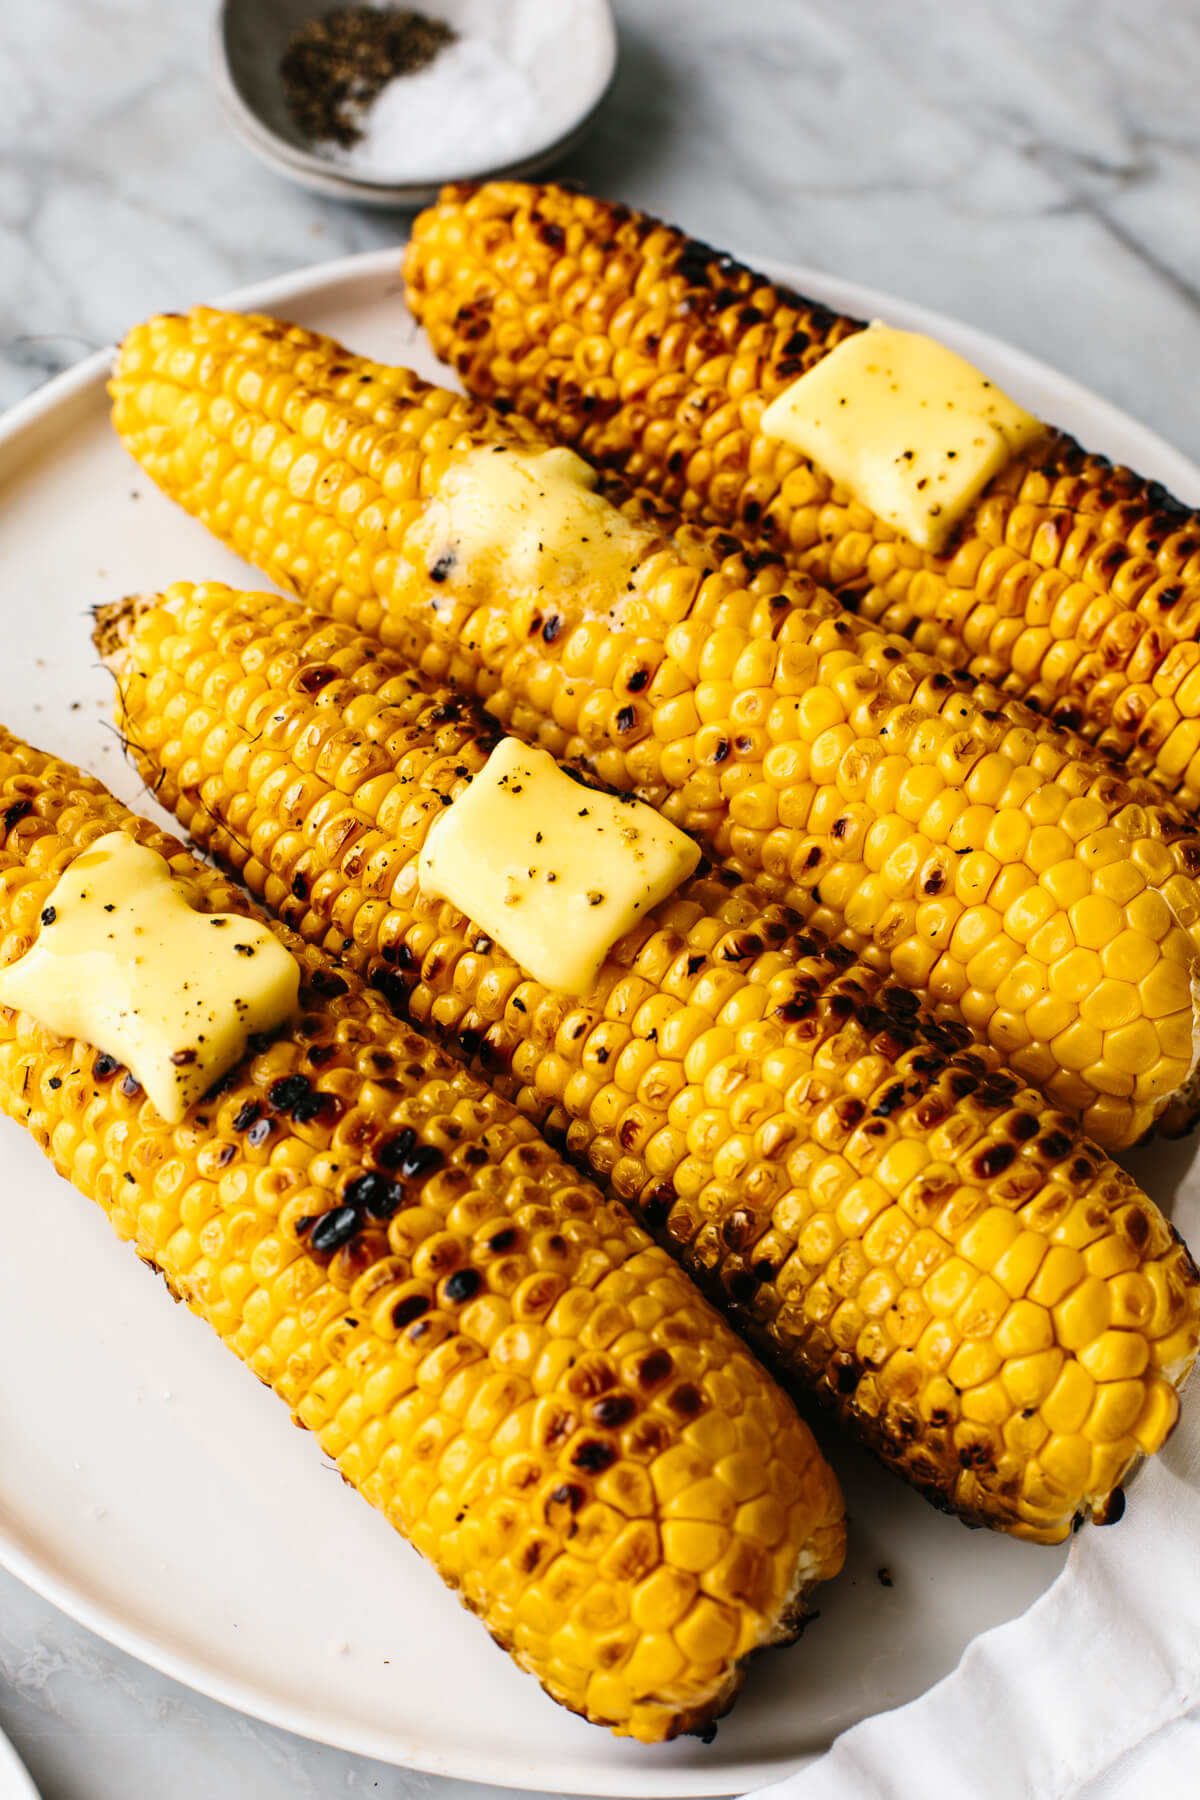 Grilled corn on the cobs withe butter on a plate